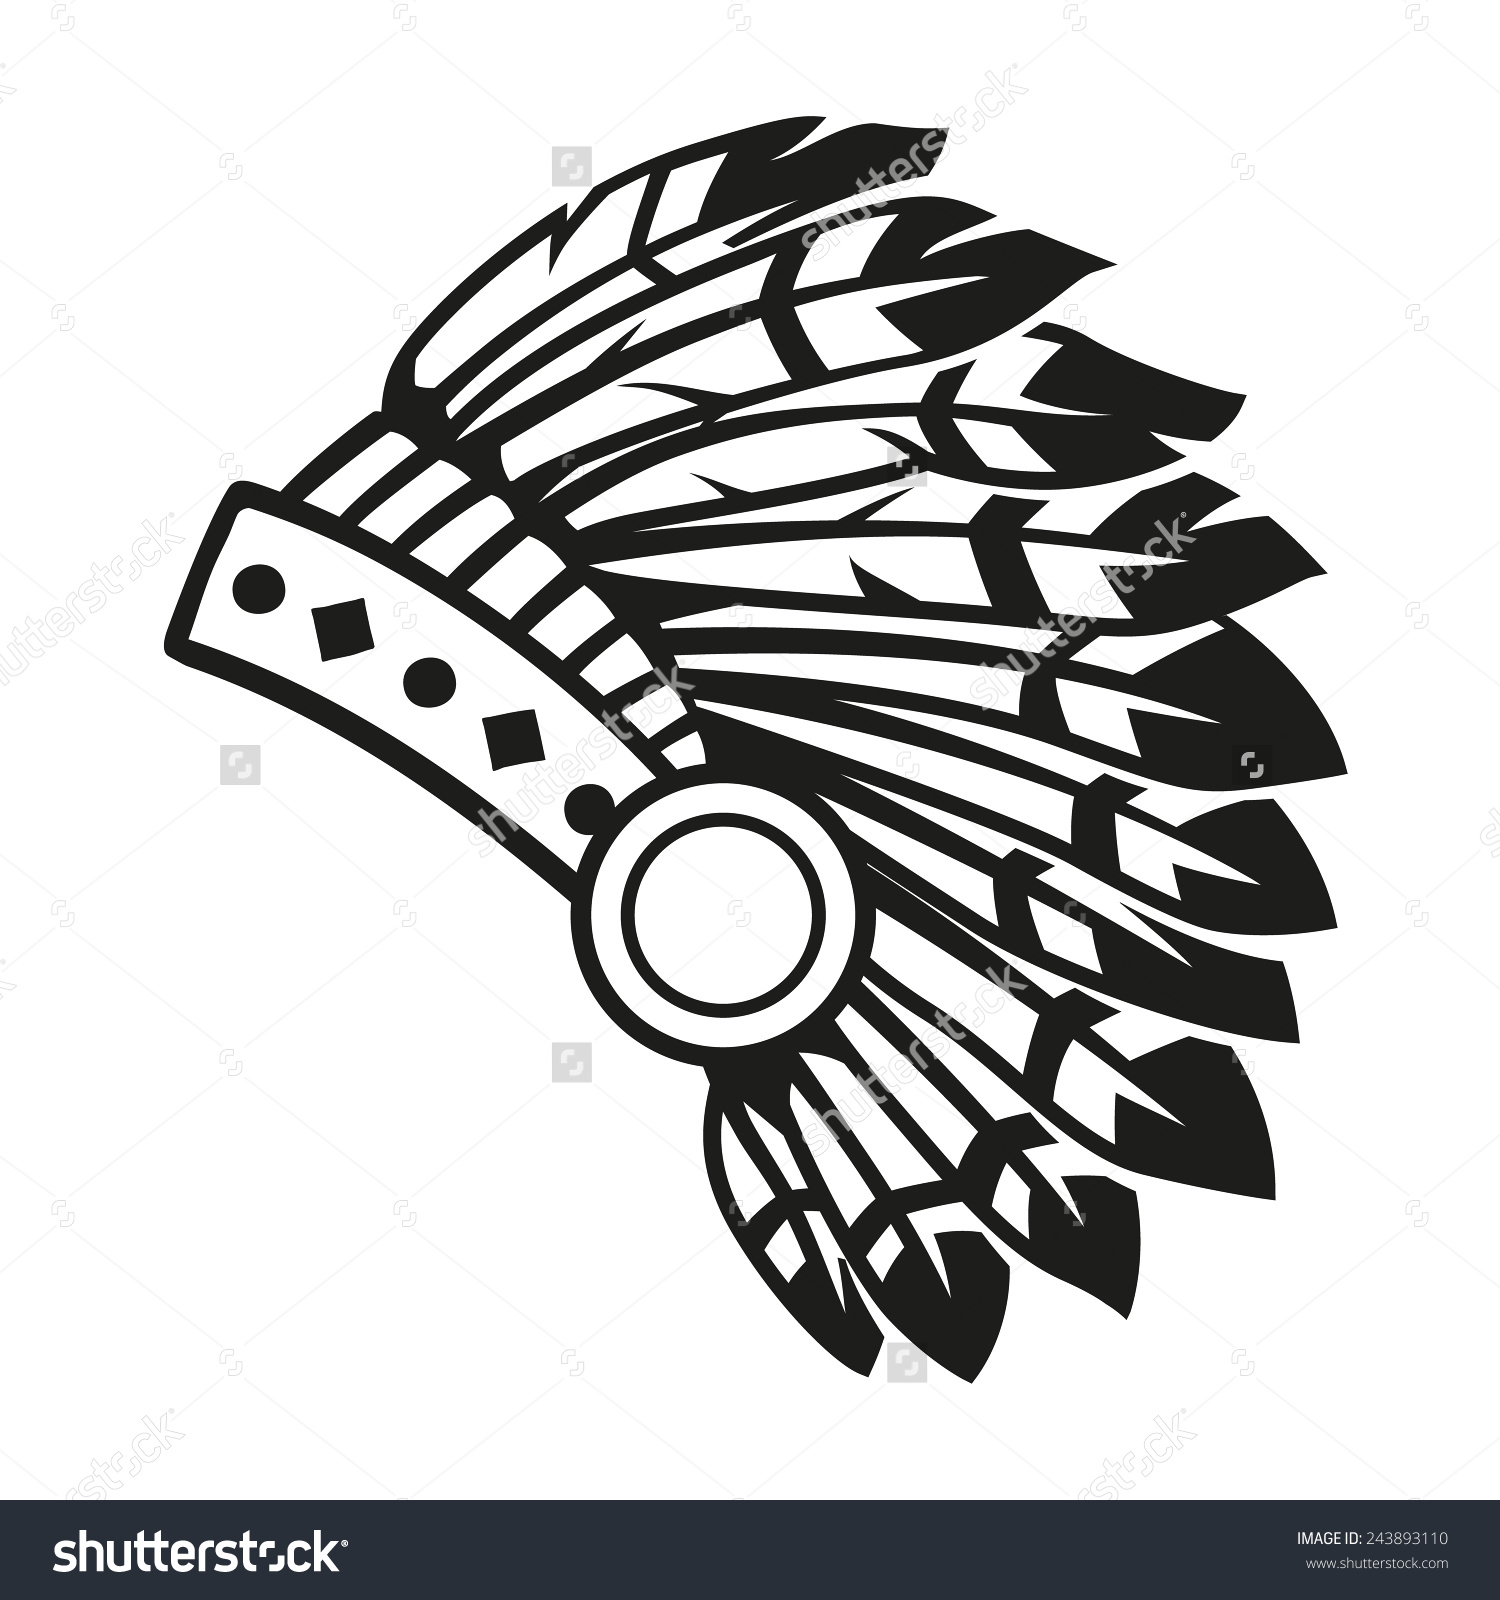 Headdress clipart #4, Download drawings